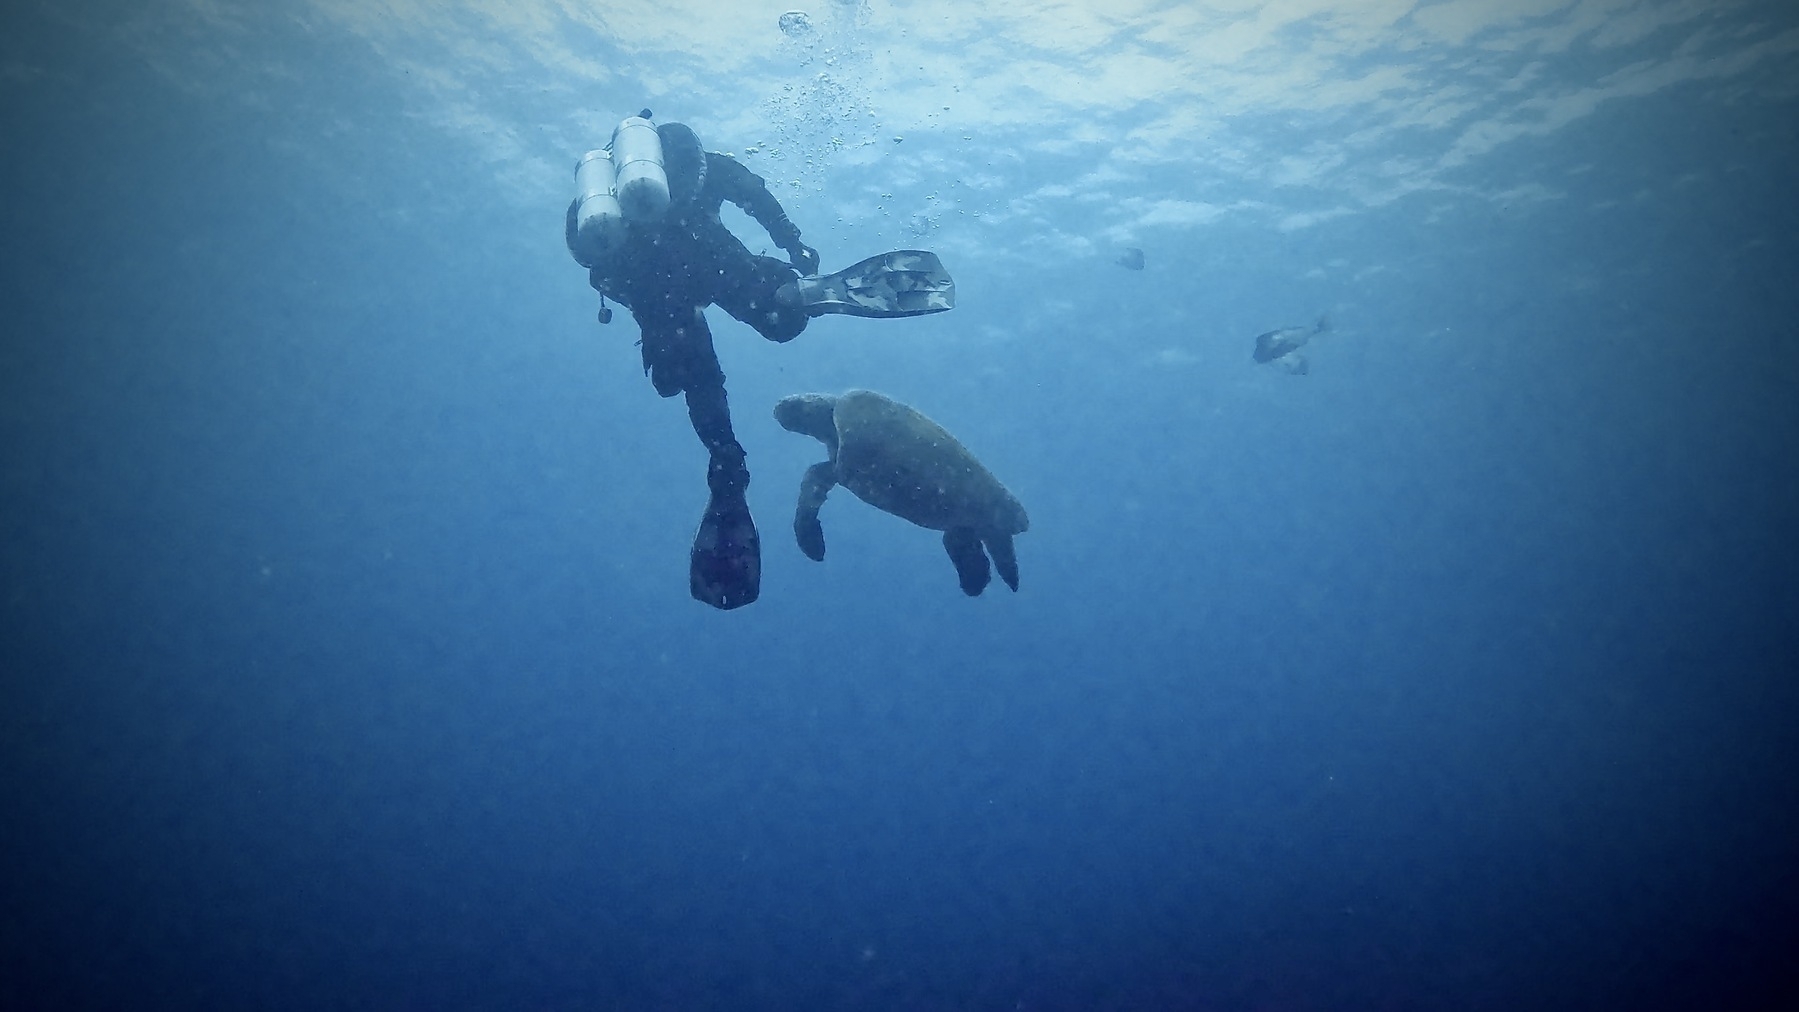 The large turtle continues to harras a nimble diver.